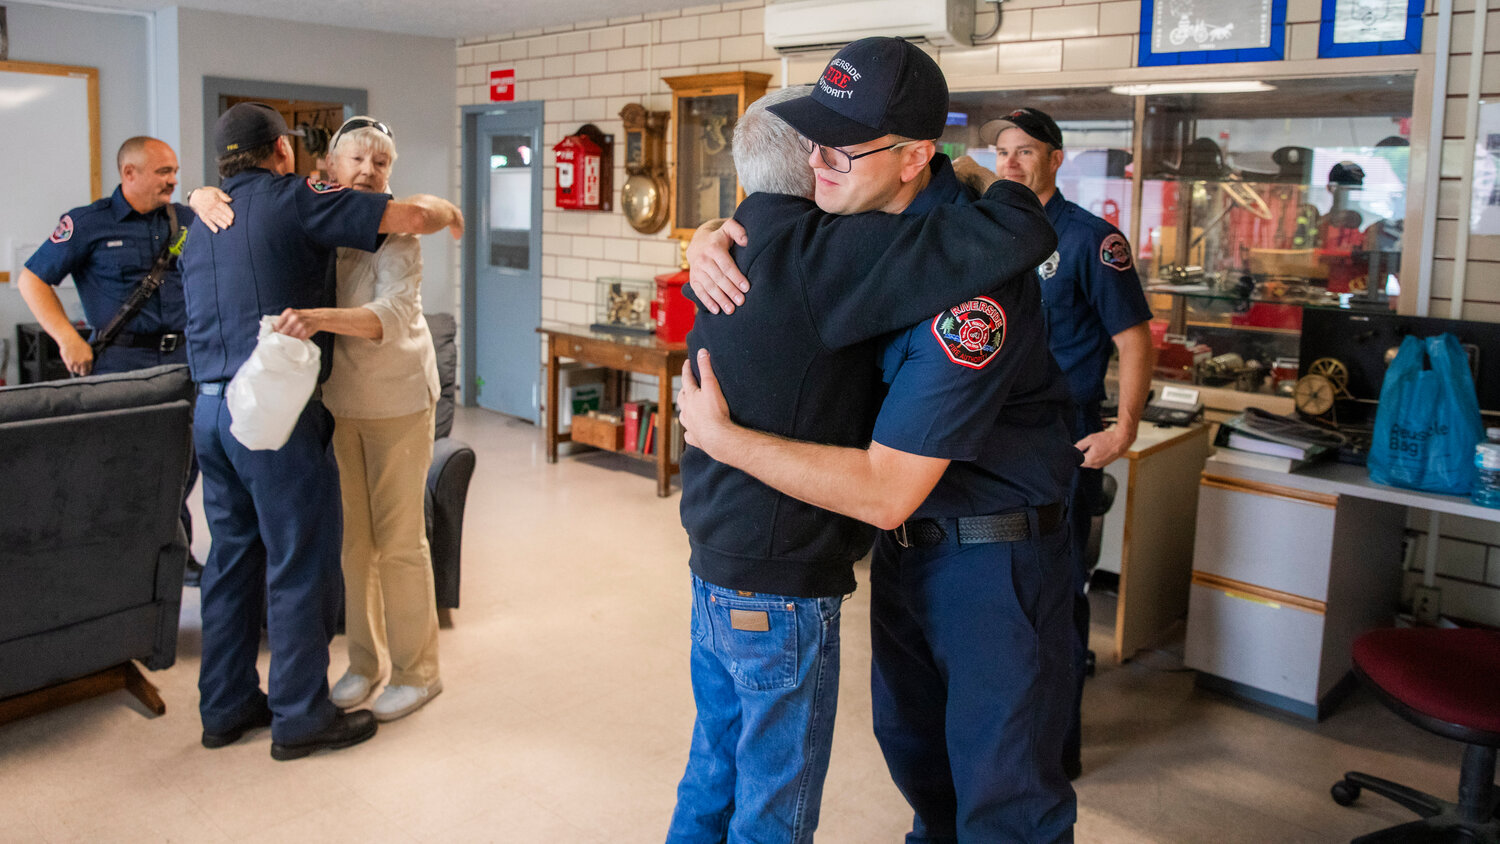 Darren Banks, the lead medic on an April call to save the life of Scott Olson, 67, hugs Olson after describing how a defibrillator was used 11 times before Olson’s heart was stabilized. The reunion occurred Wednesday morning at the Riverside Fire Station along North Pearl Street in Centralia.